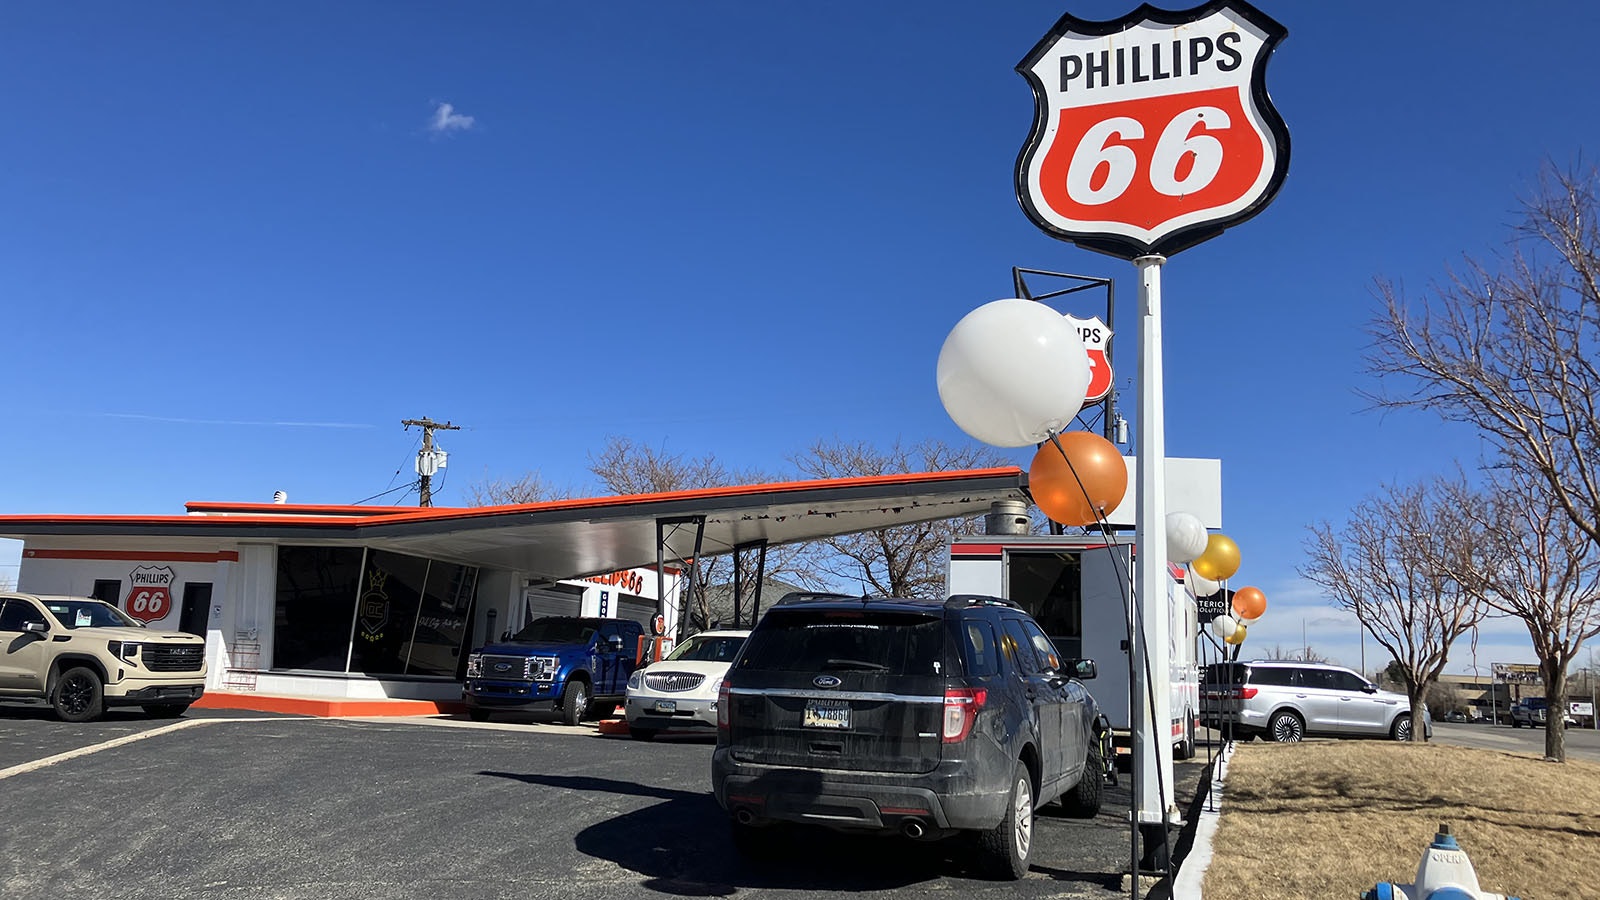 What looks like a Phillips 66 station in Casper is actually a salute to the 1960s. The building houses an auto detailing business, and the lot hosts vehicles for sale and the food truck Gringos.